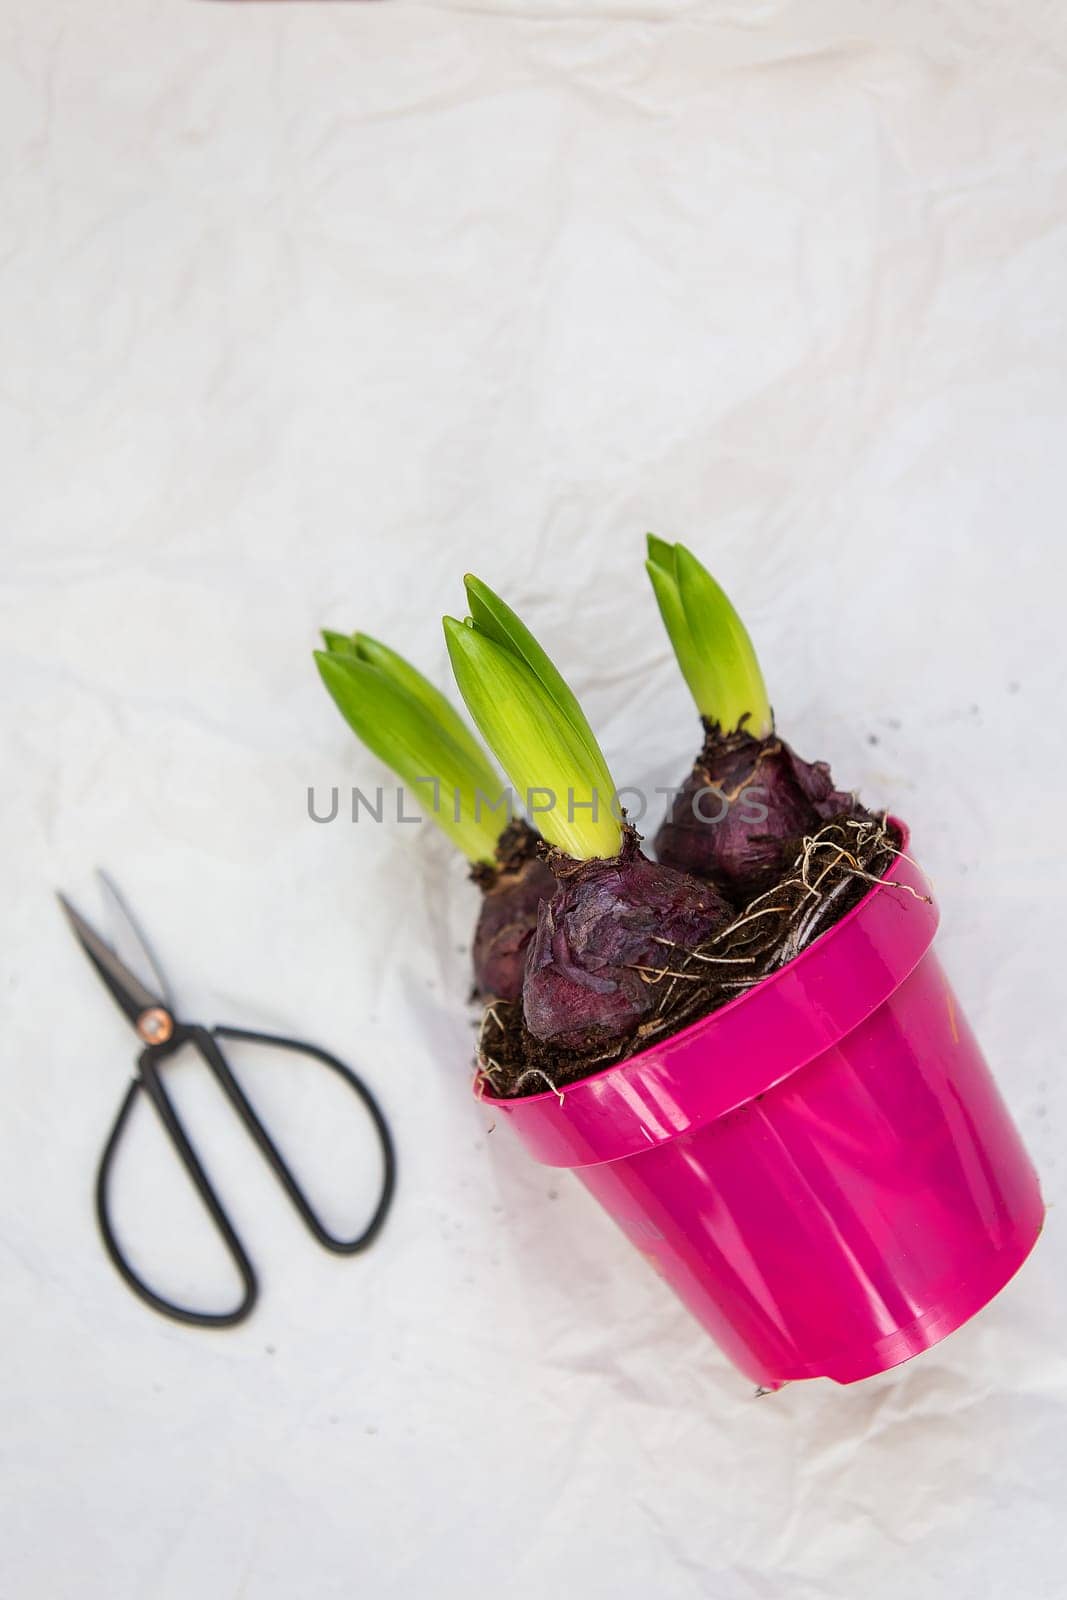 Hyacinth flower in a pink pot together with scissors on a white background. Gardening in the spring, planting hyacinth by sfinks